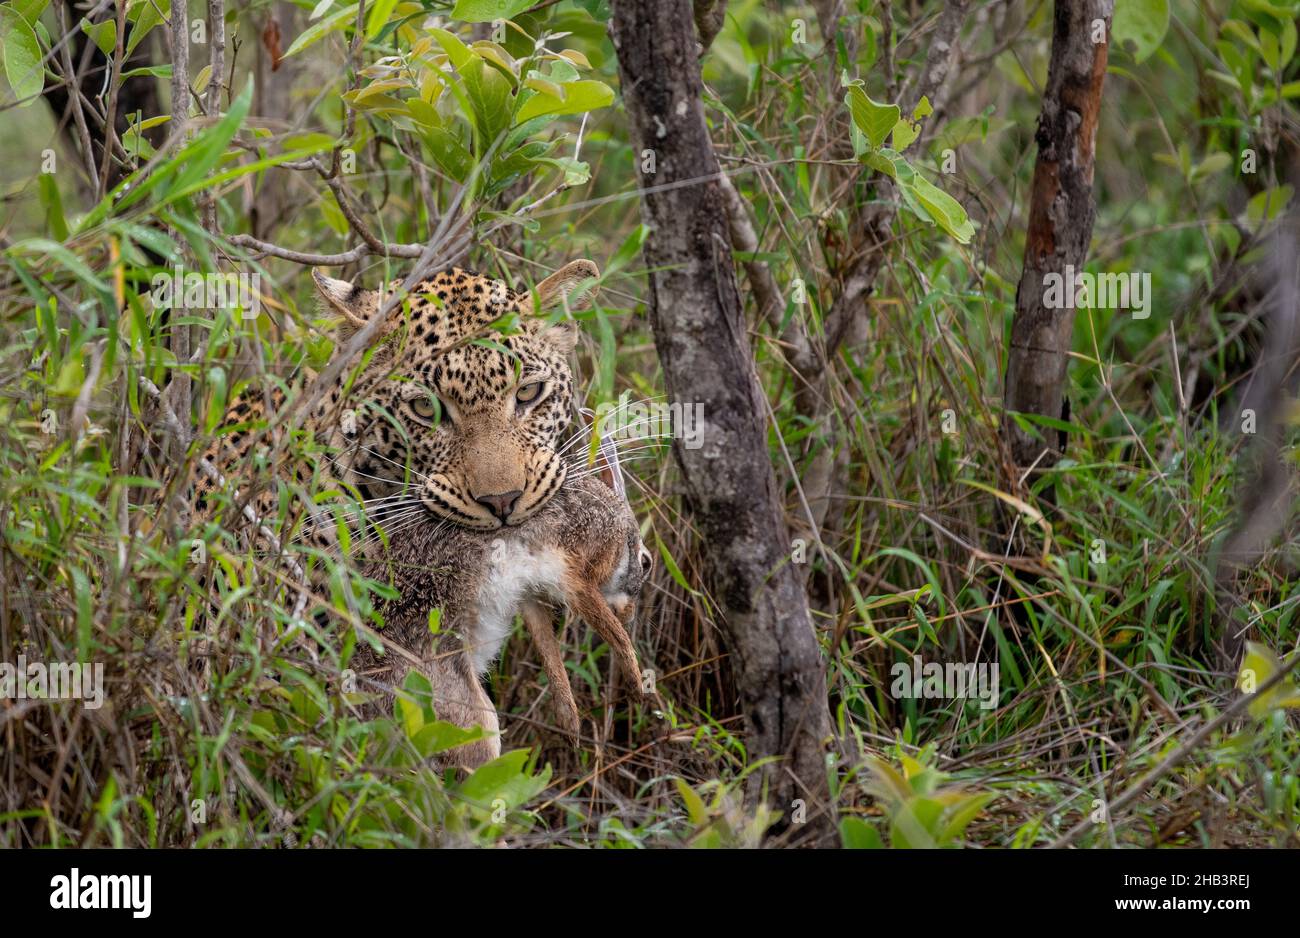 African leopard with a scrub hare in its mouth in Sabi Sands Game Reserve, South Africa Stock Photo